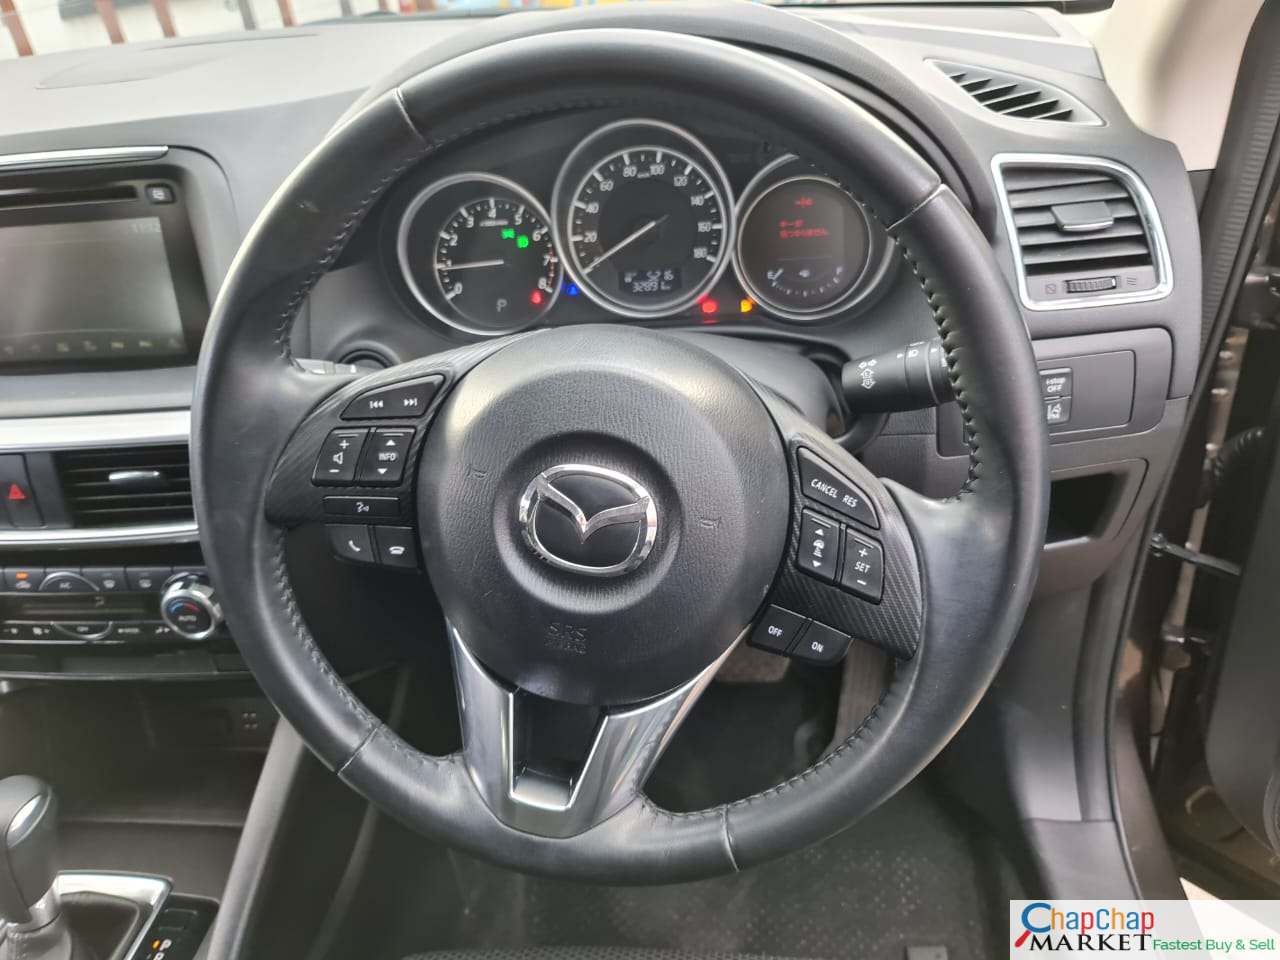 Mazda CX5 CX-5 LATEST CHEAPEST You Pay 30% DEPOSIT TRADE IN OK EXCLUSIVE